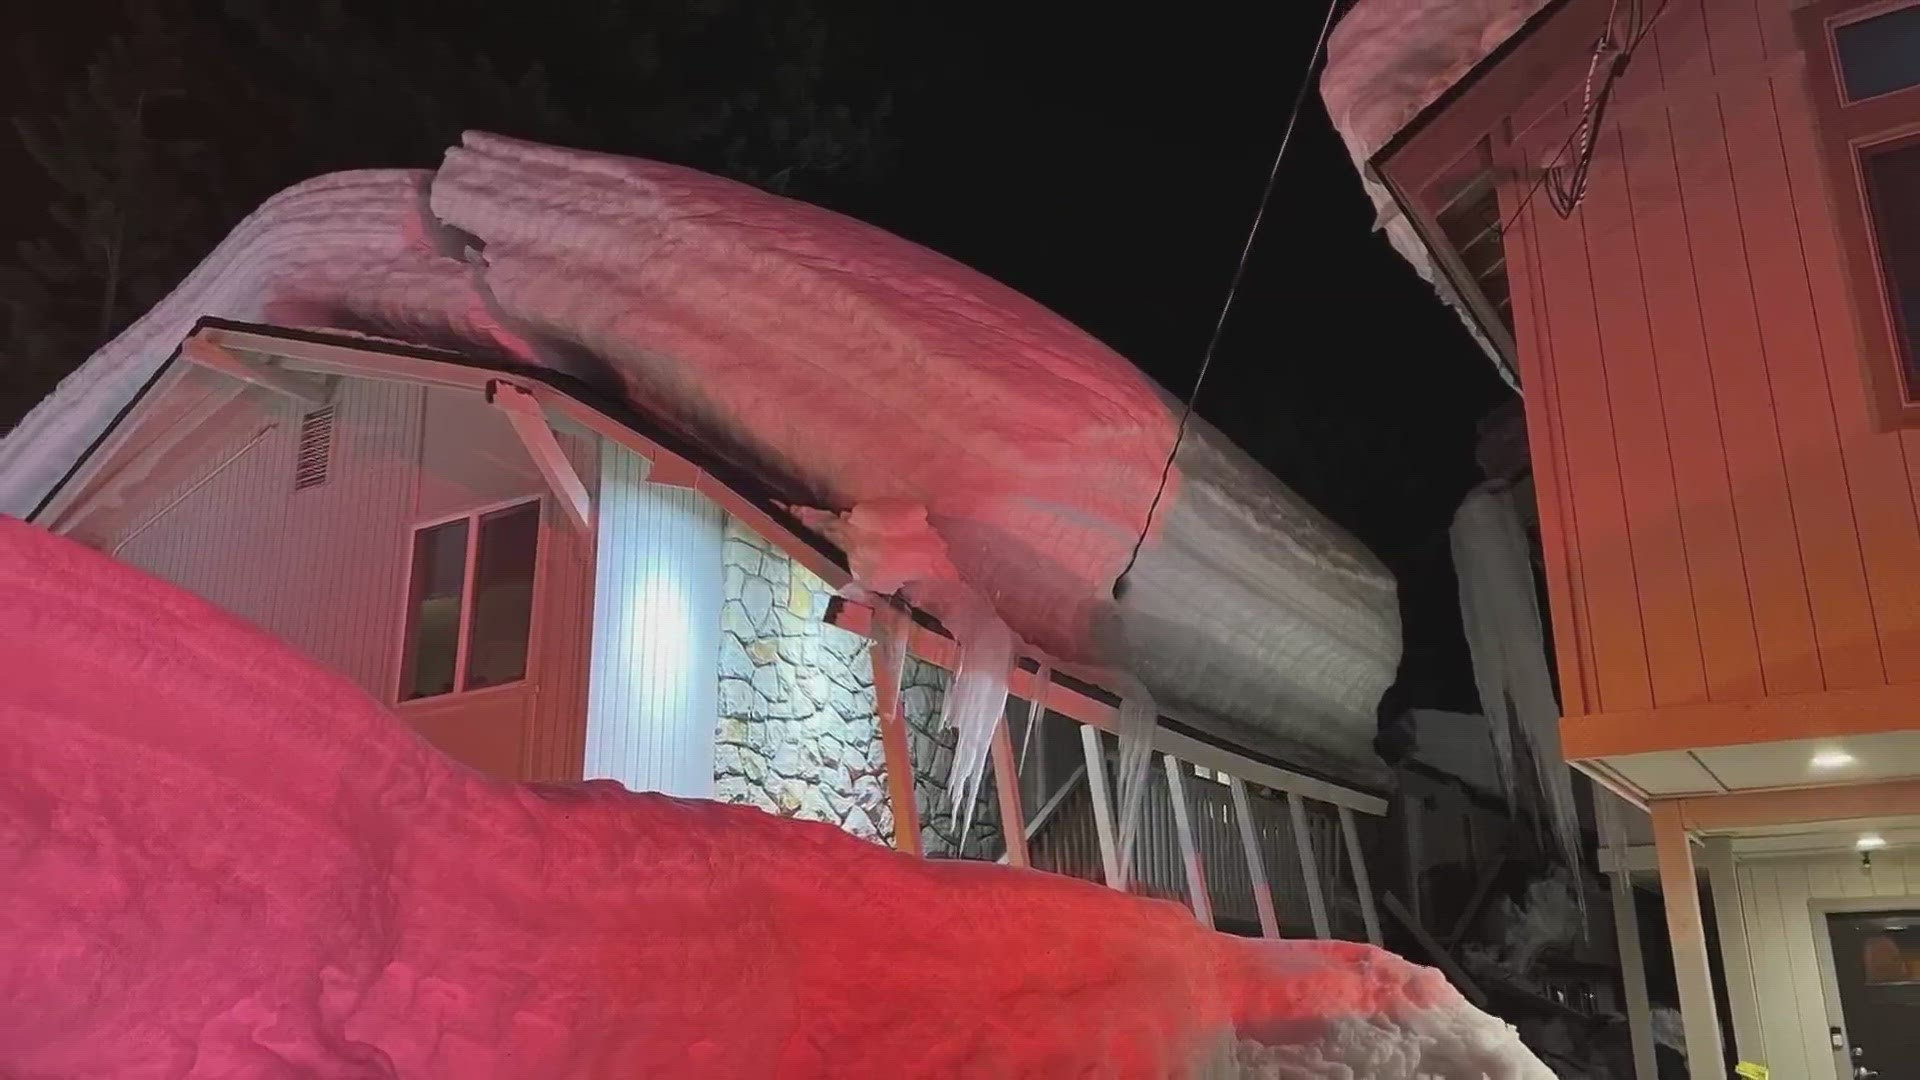 Officials are working to prevent "snow loading" when rain weighs down existing snow on a roof, causing a collapse.